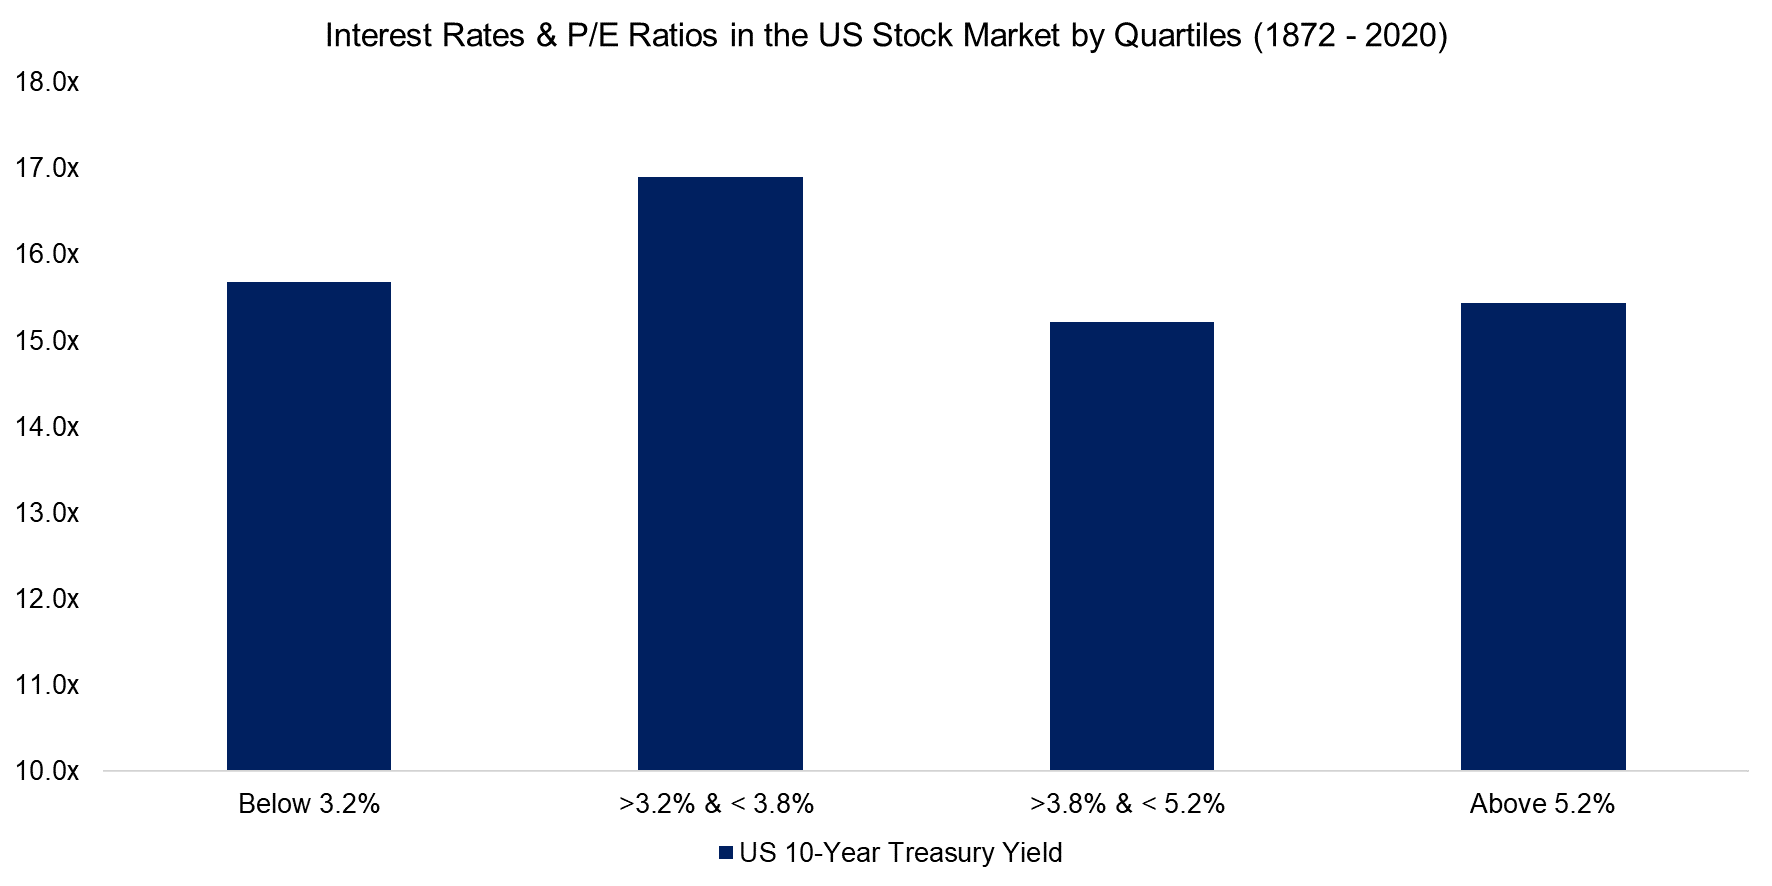 Interest Rates & PE-Ratio in the US Stock Market by Quartiles (1872 - 2020)